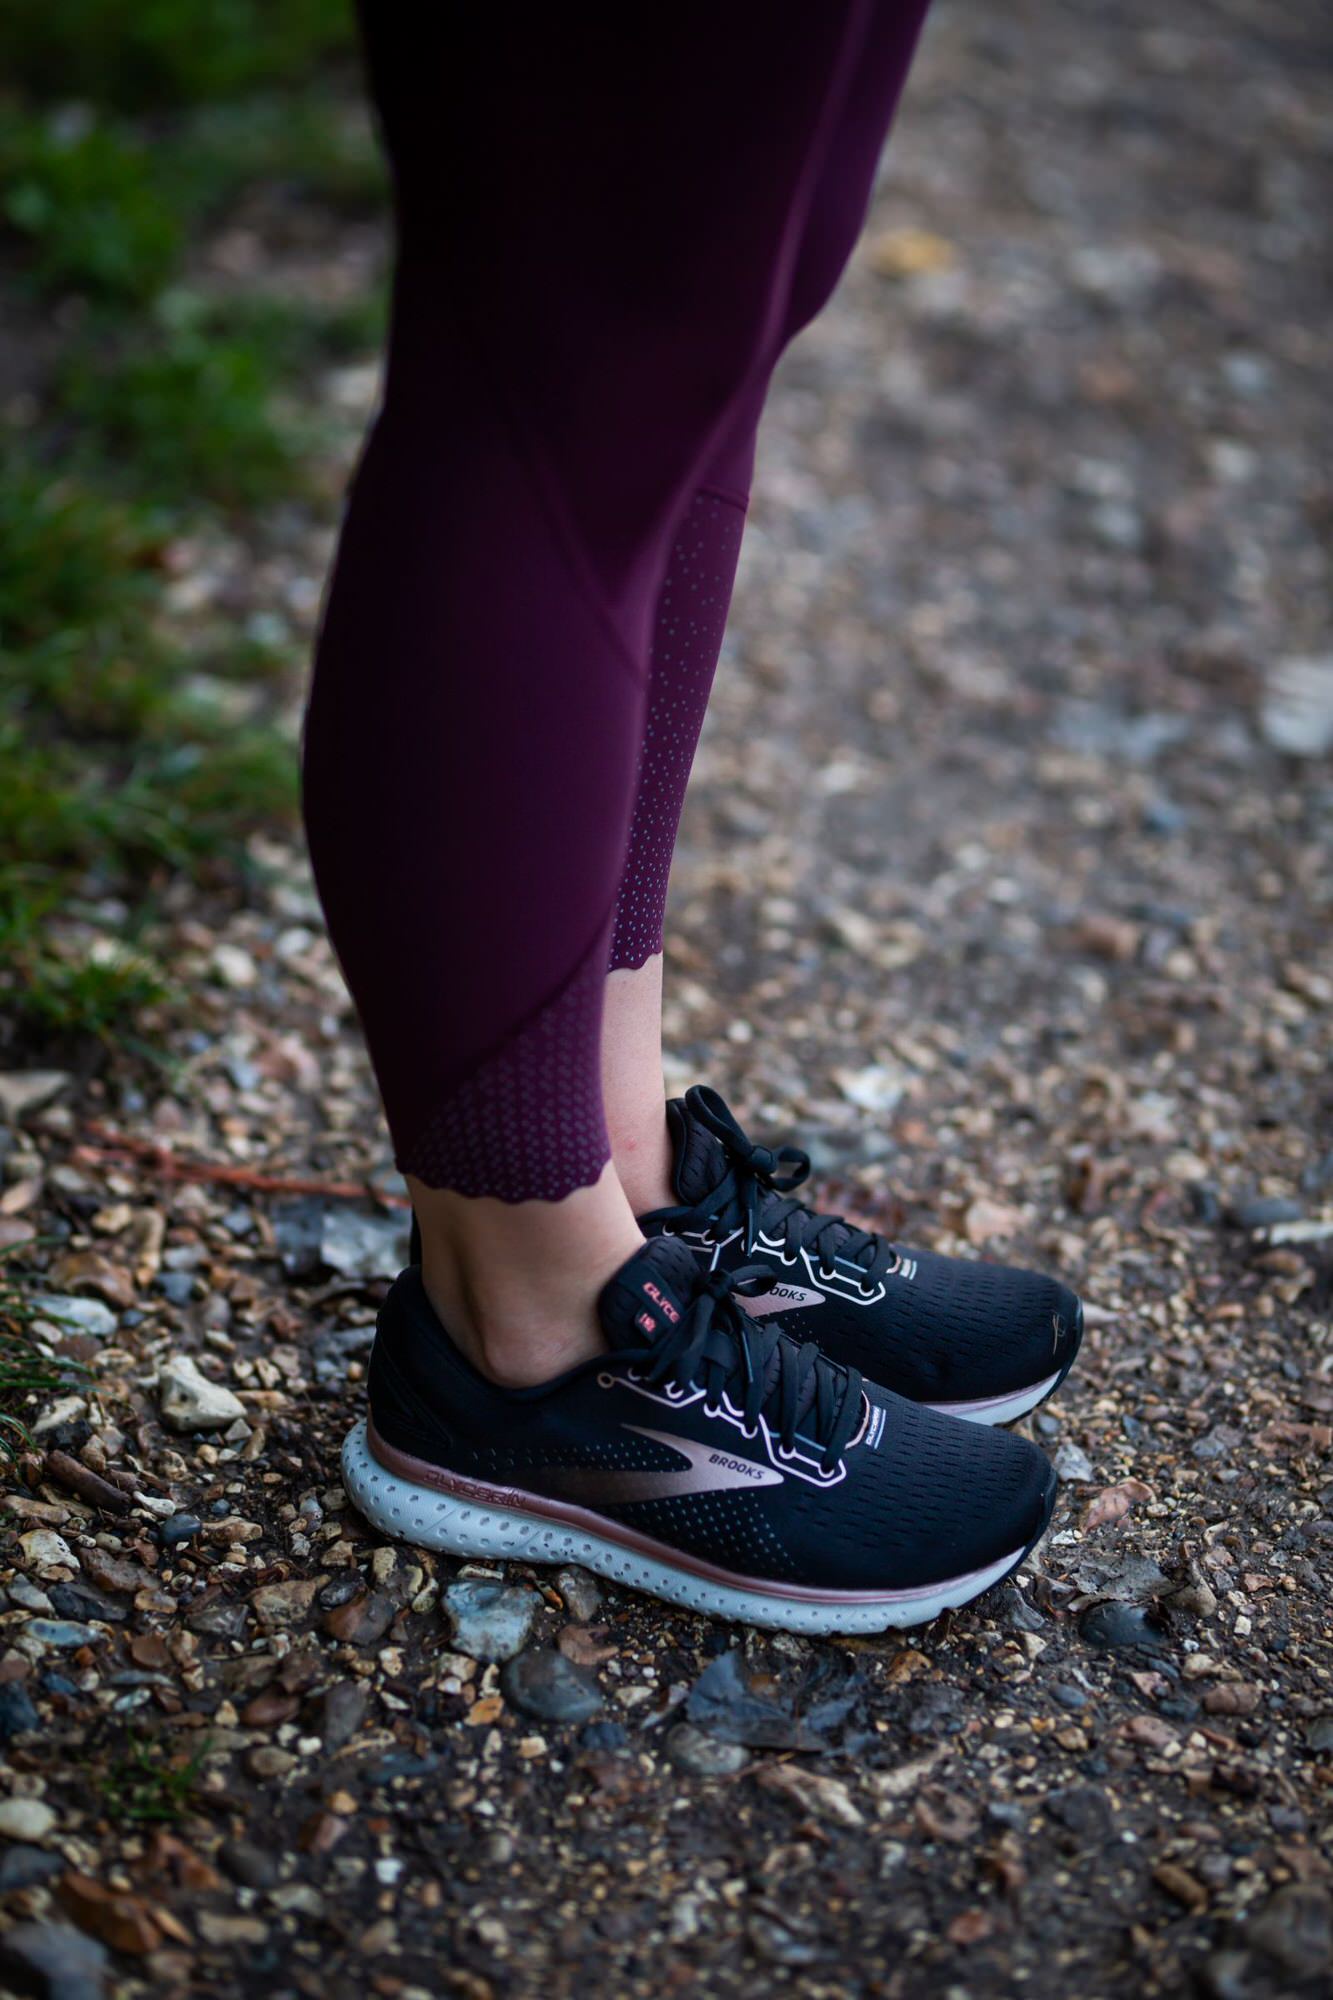 brooks glycerin shoes review